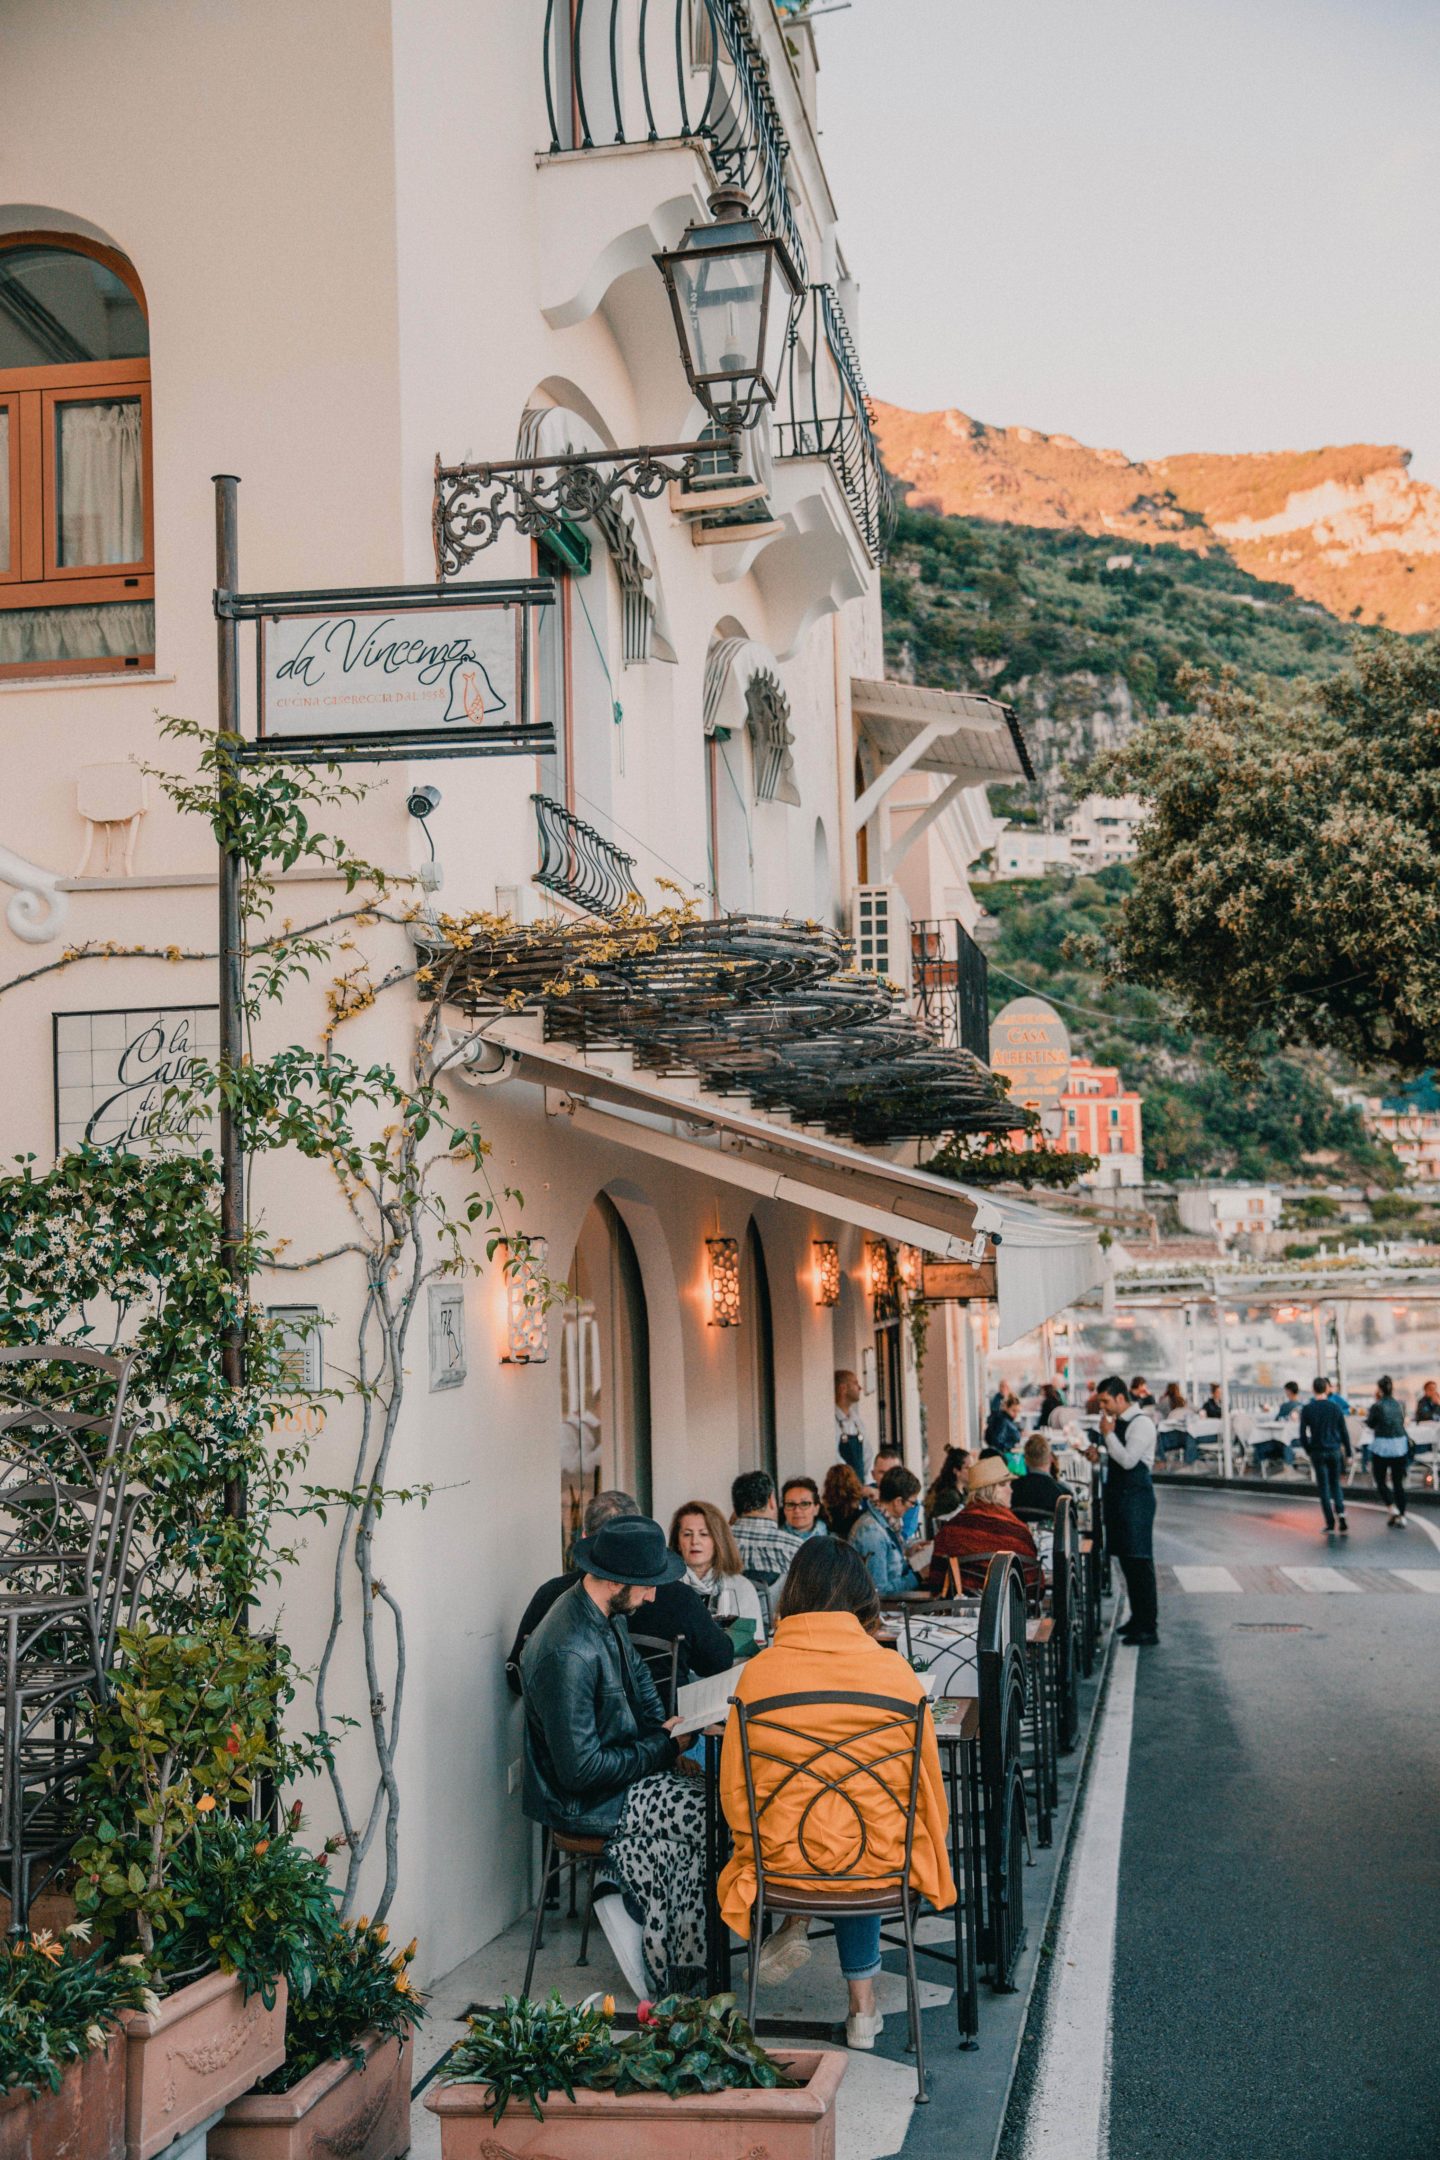 Ultimate 4 Day Positano Italy Travel Itinerary | What to See & Where to Eat: Da Vincenzo